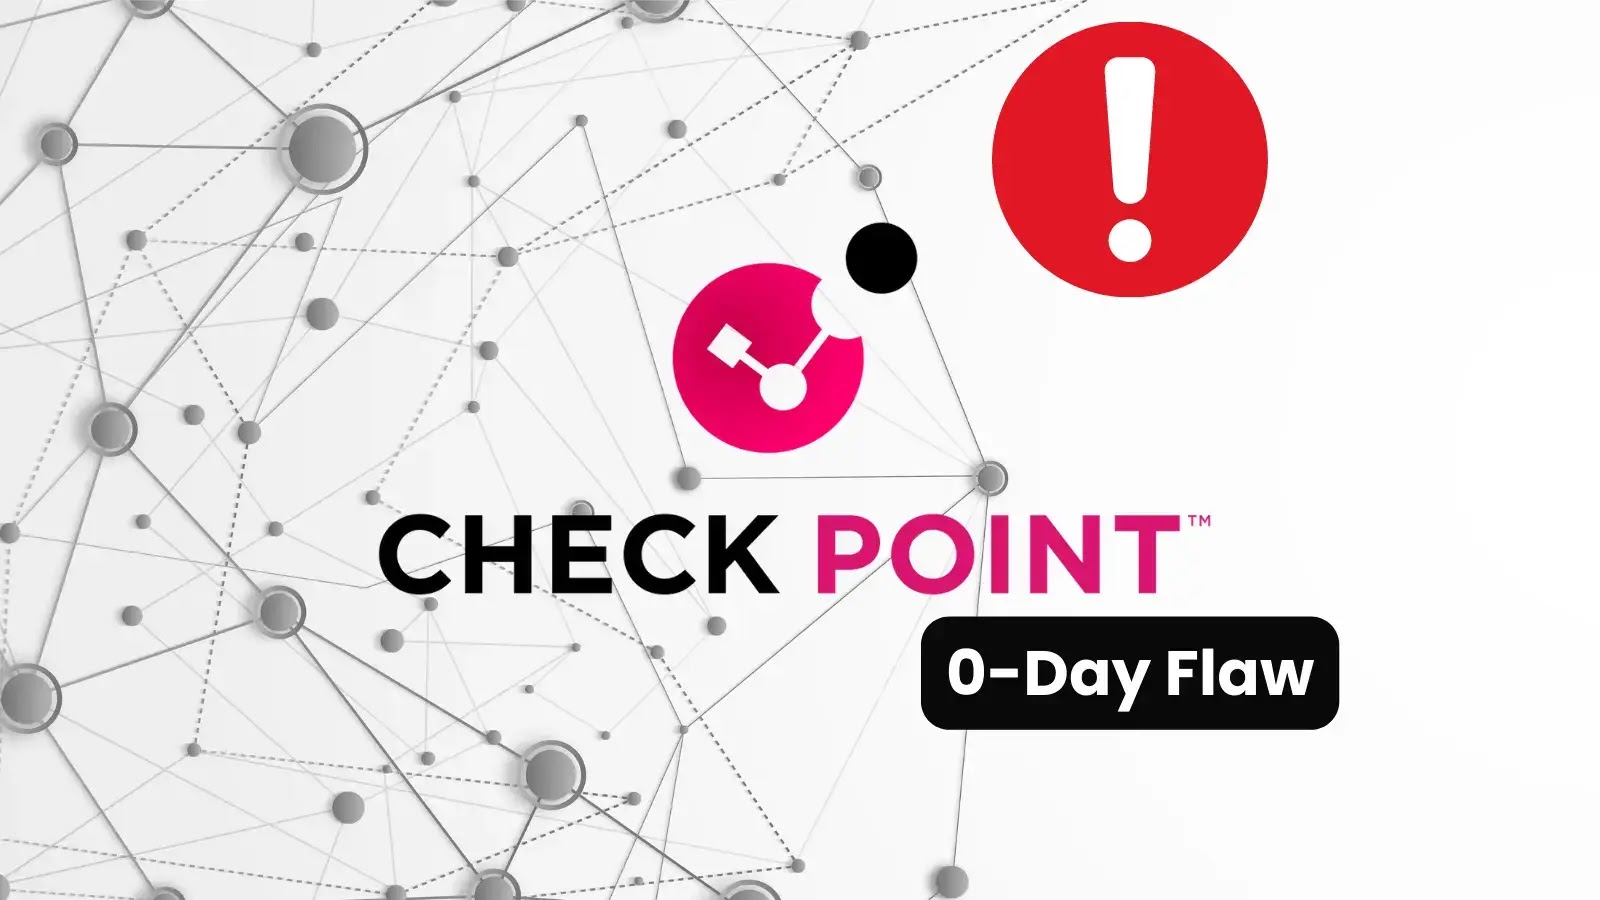 Hackers Actively Exploiting Checkpoint 0-Day Flaw